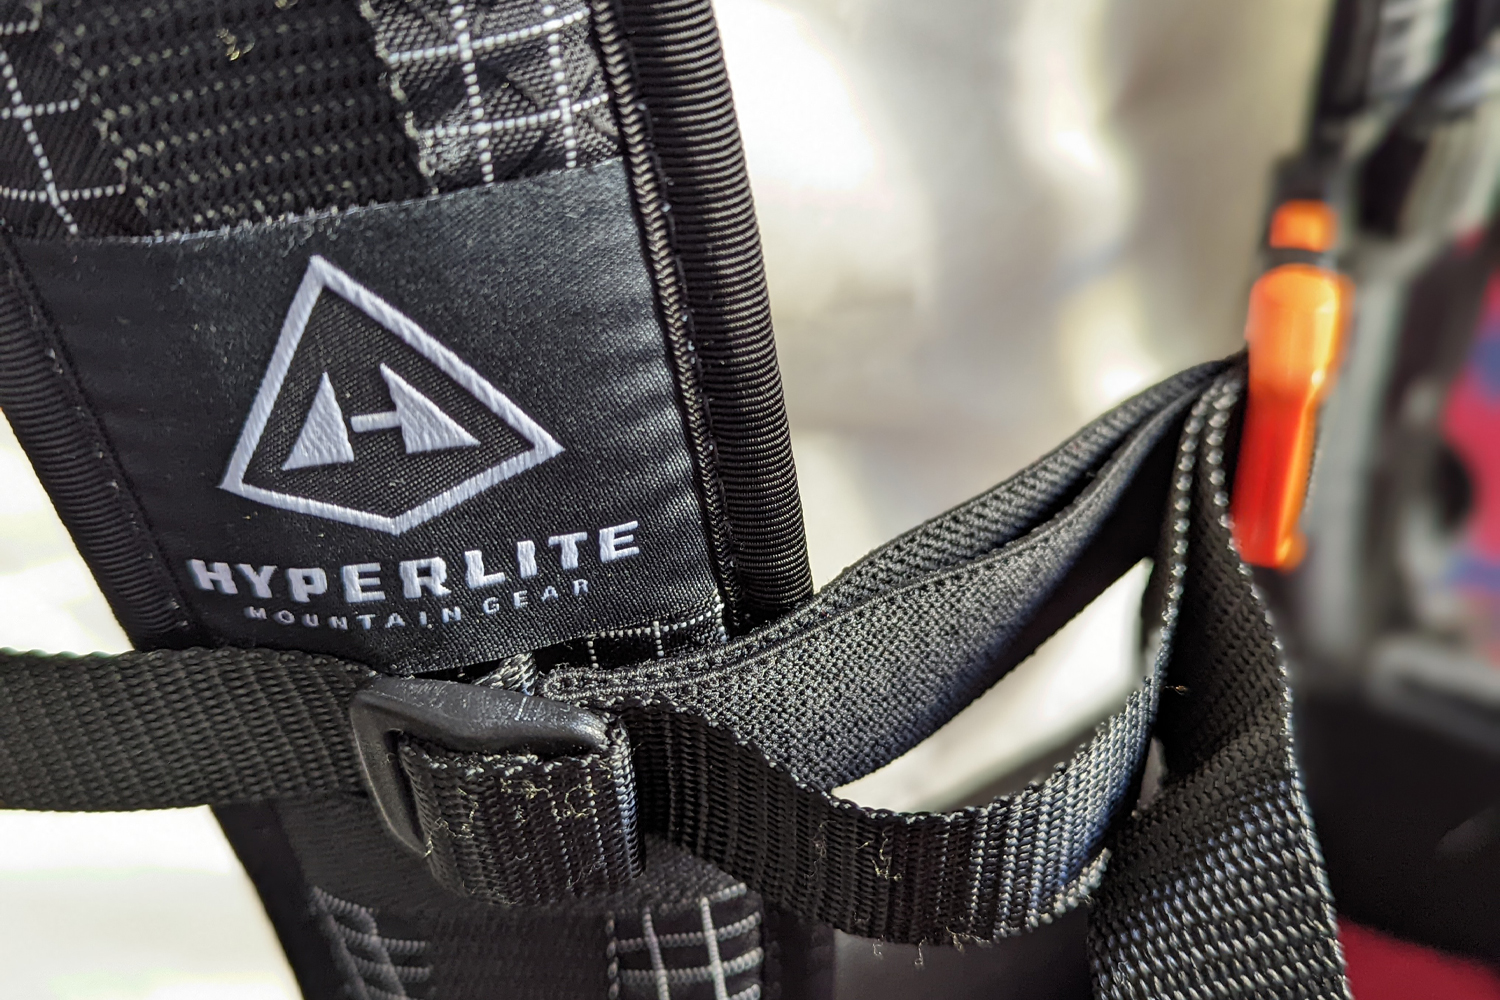 Hyperlite Mountain Gear's attention to detail is unmistakable